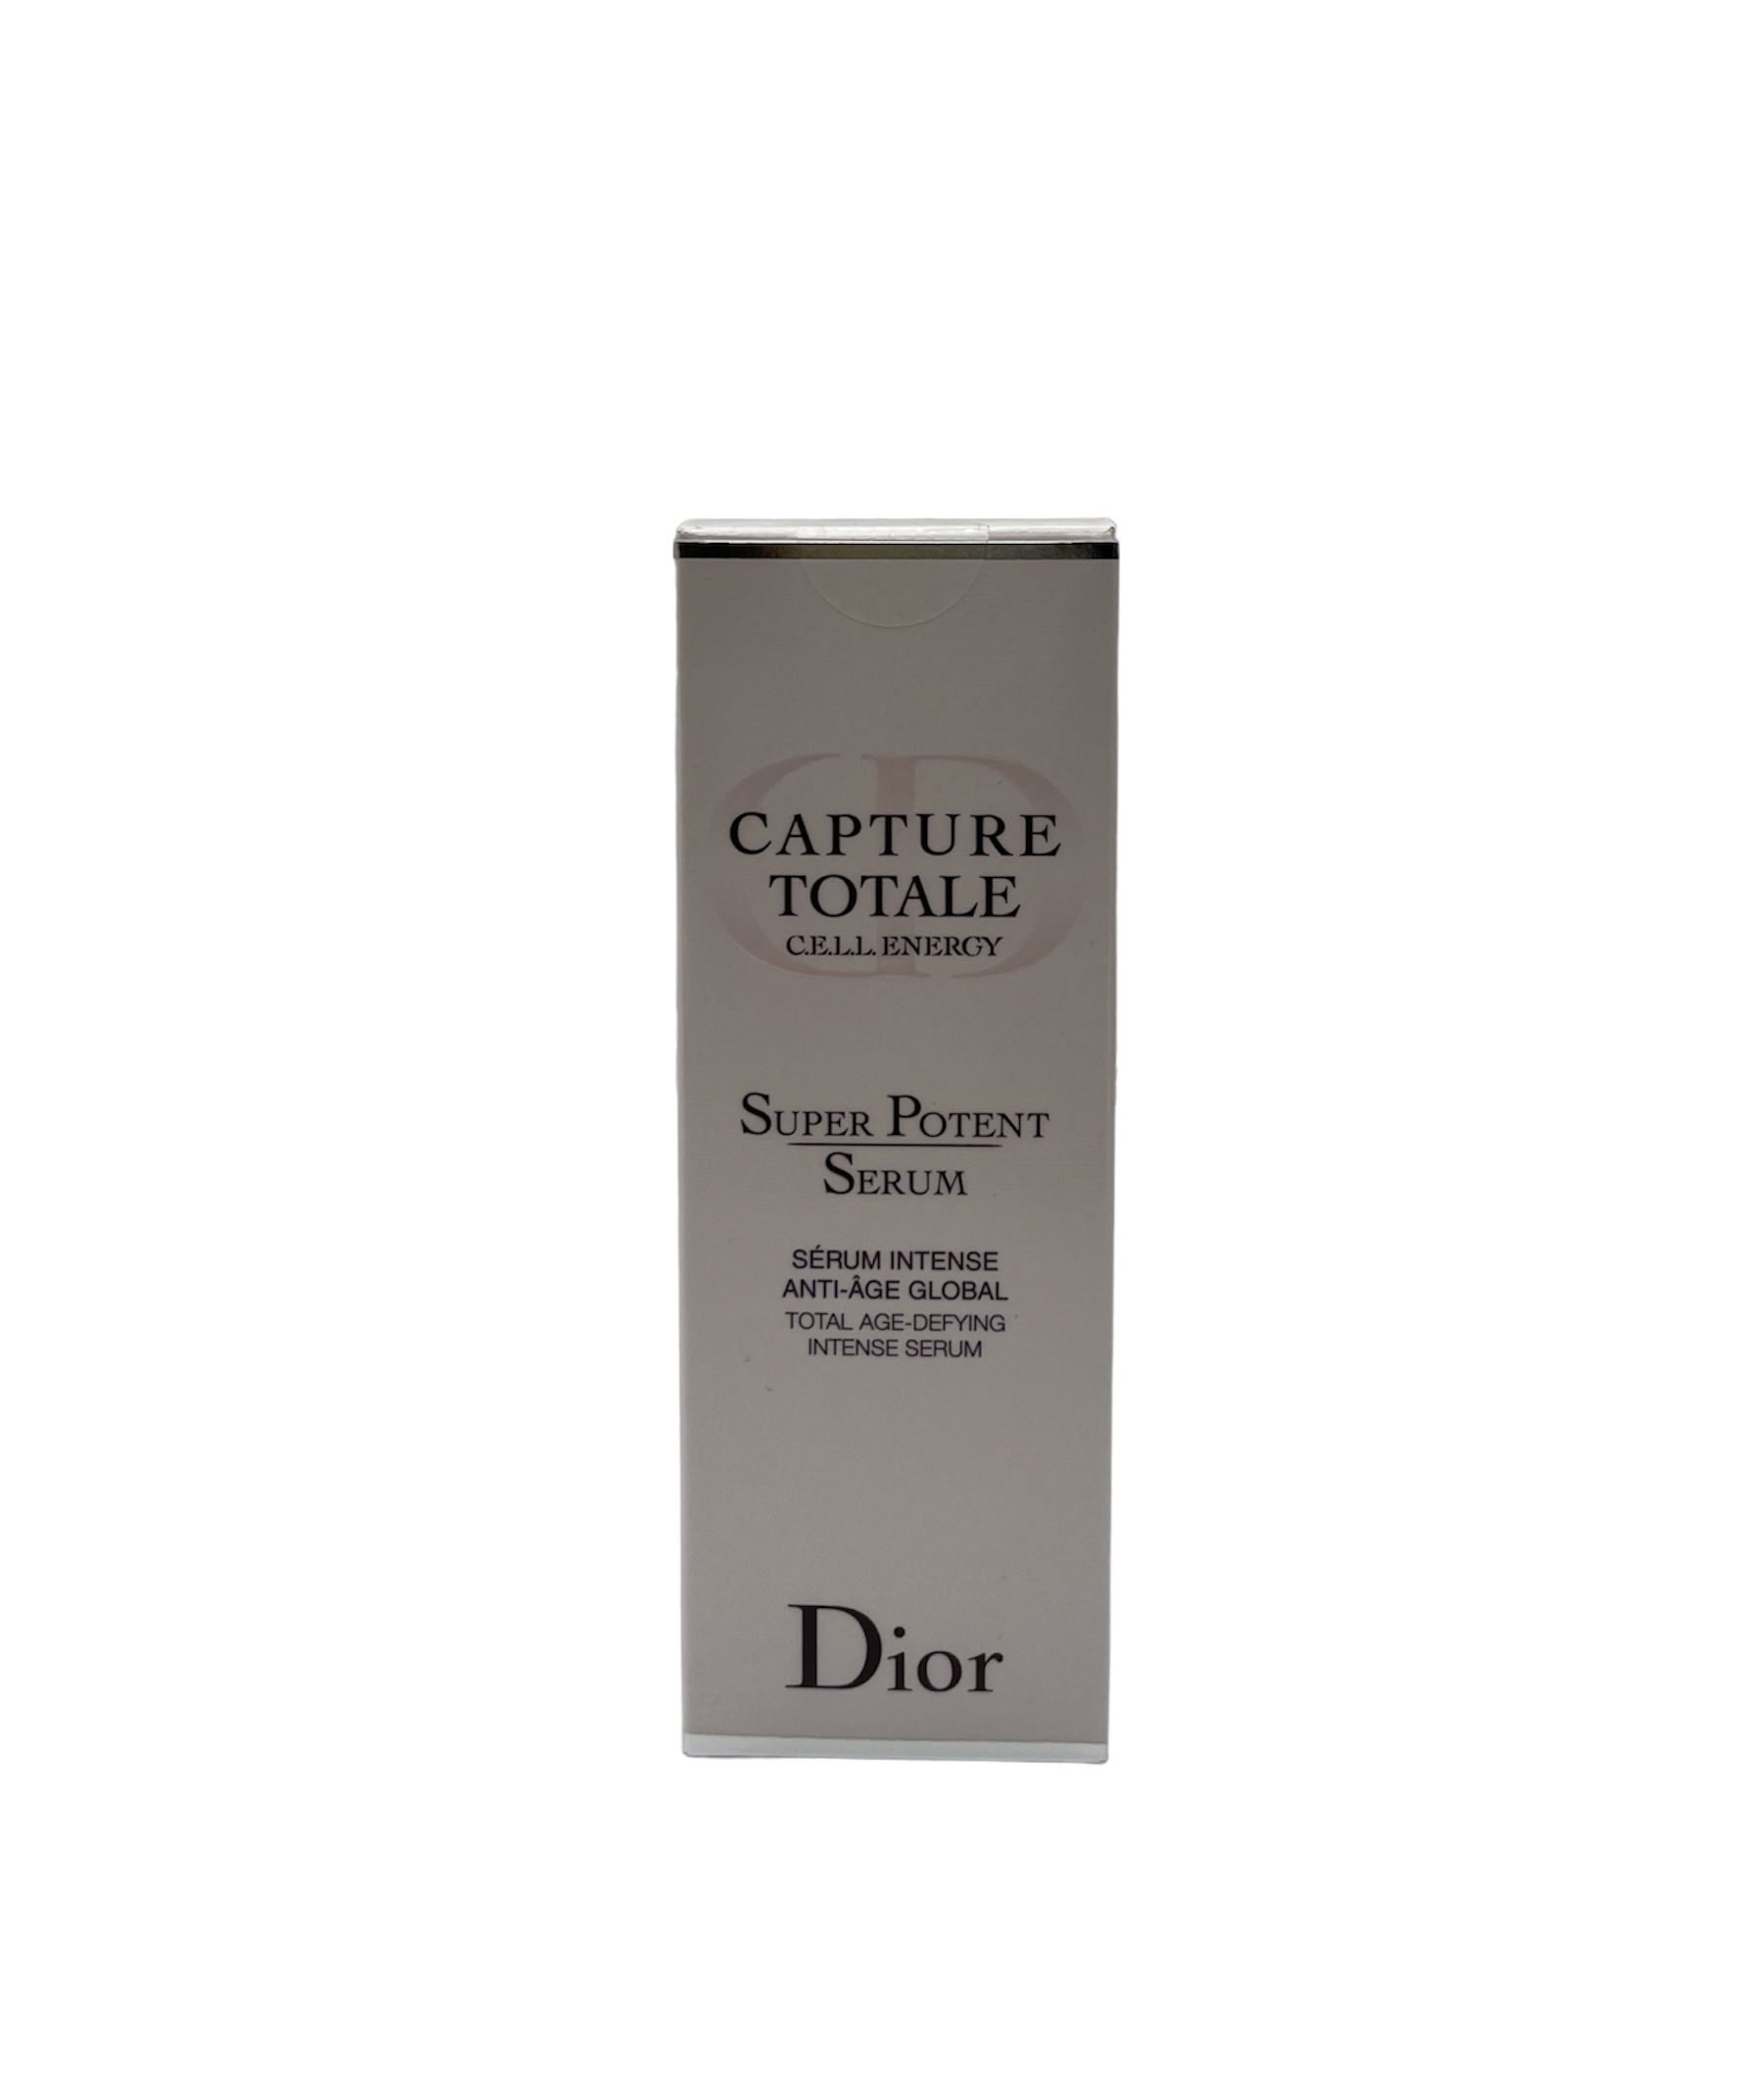 Dior - Capture Totale Cell Energy, Super Potent Serum 50ml